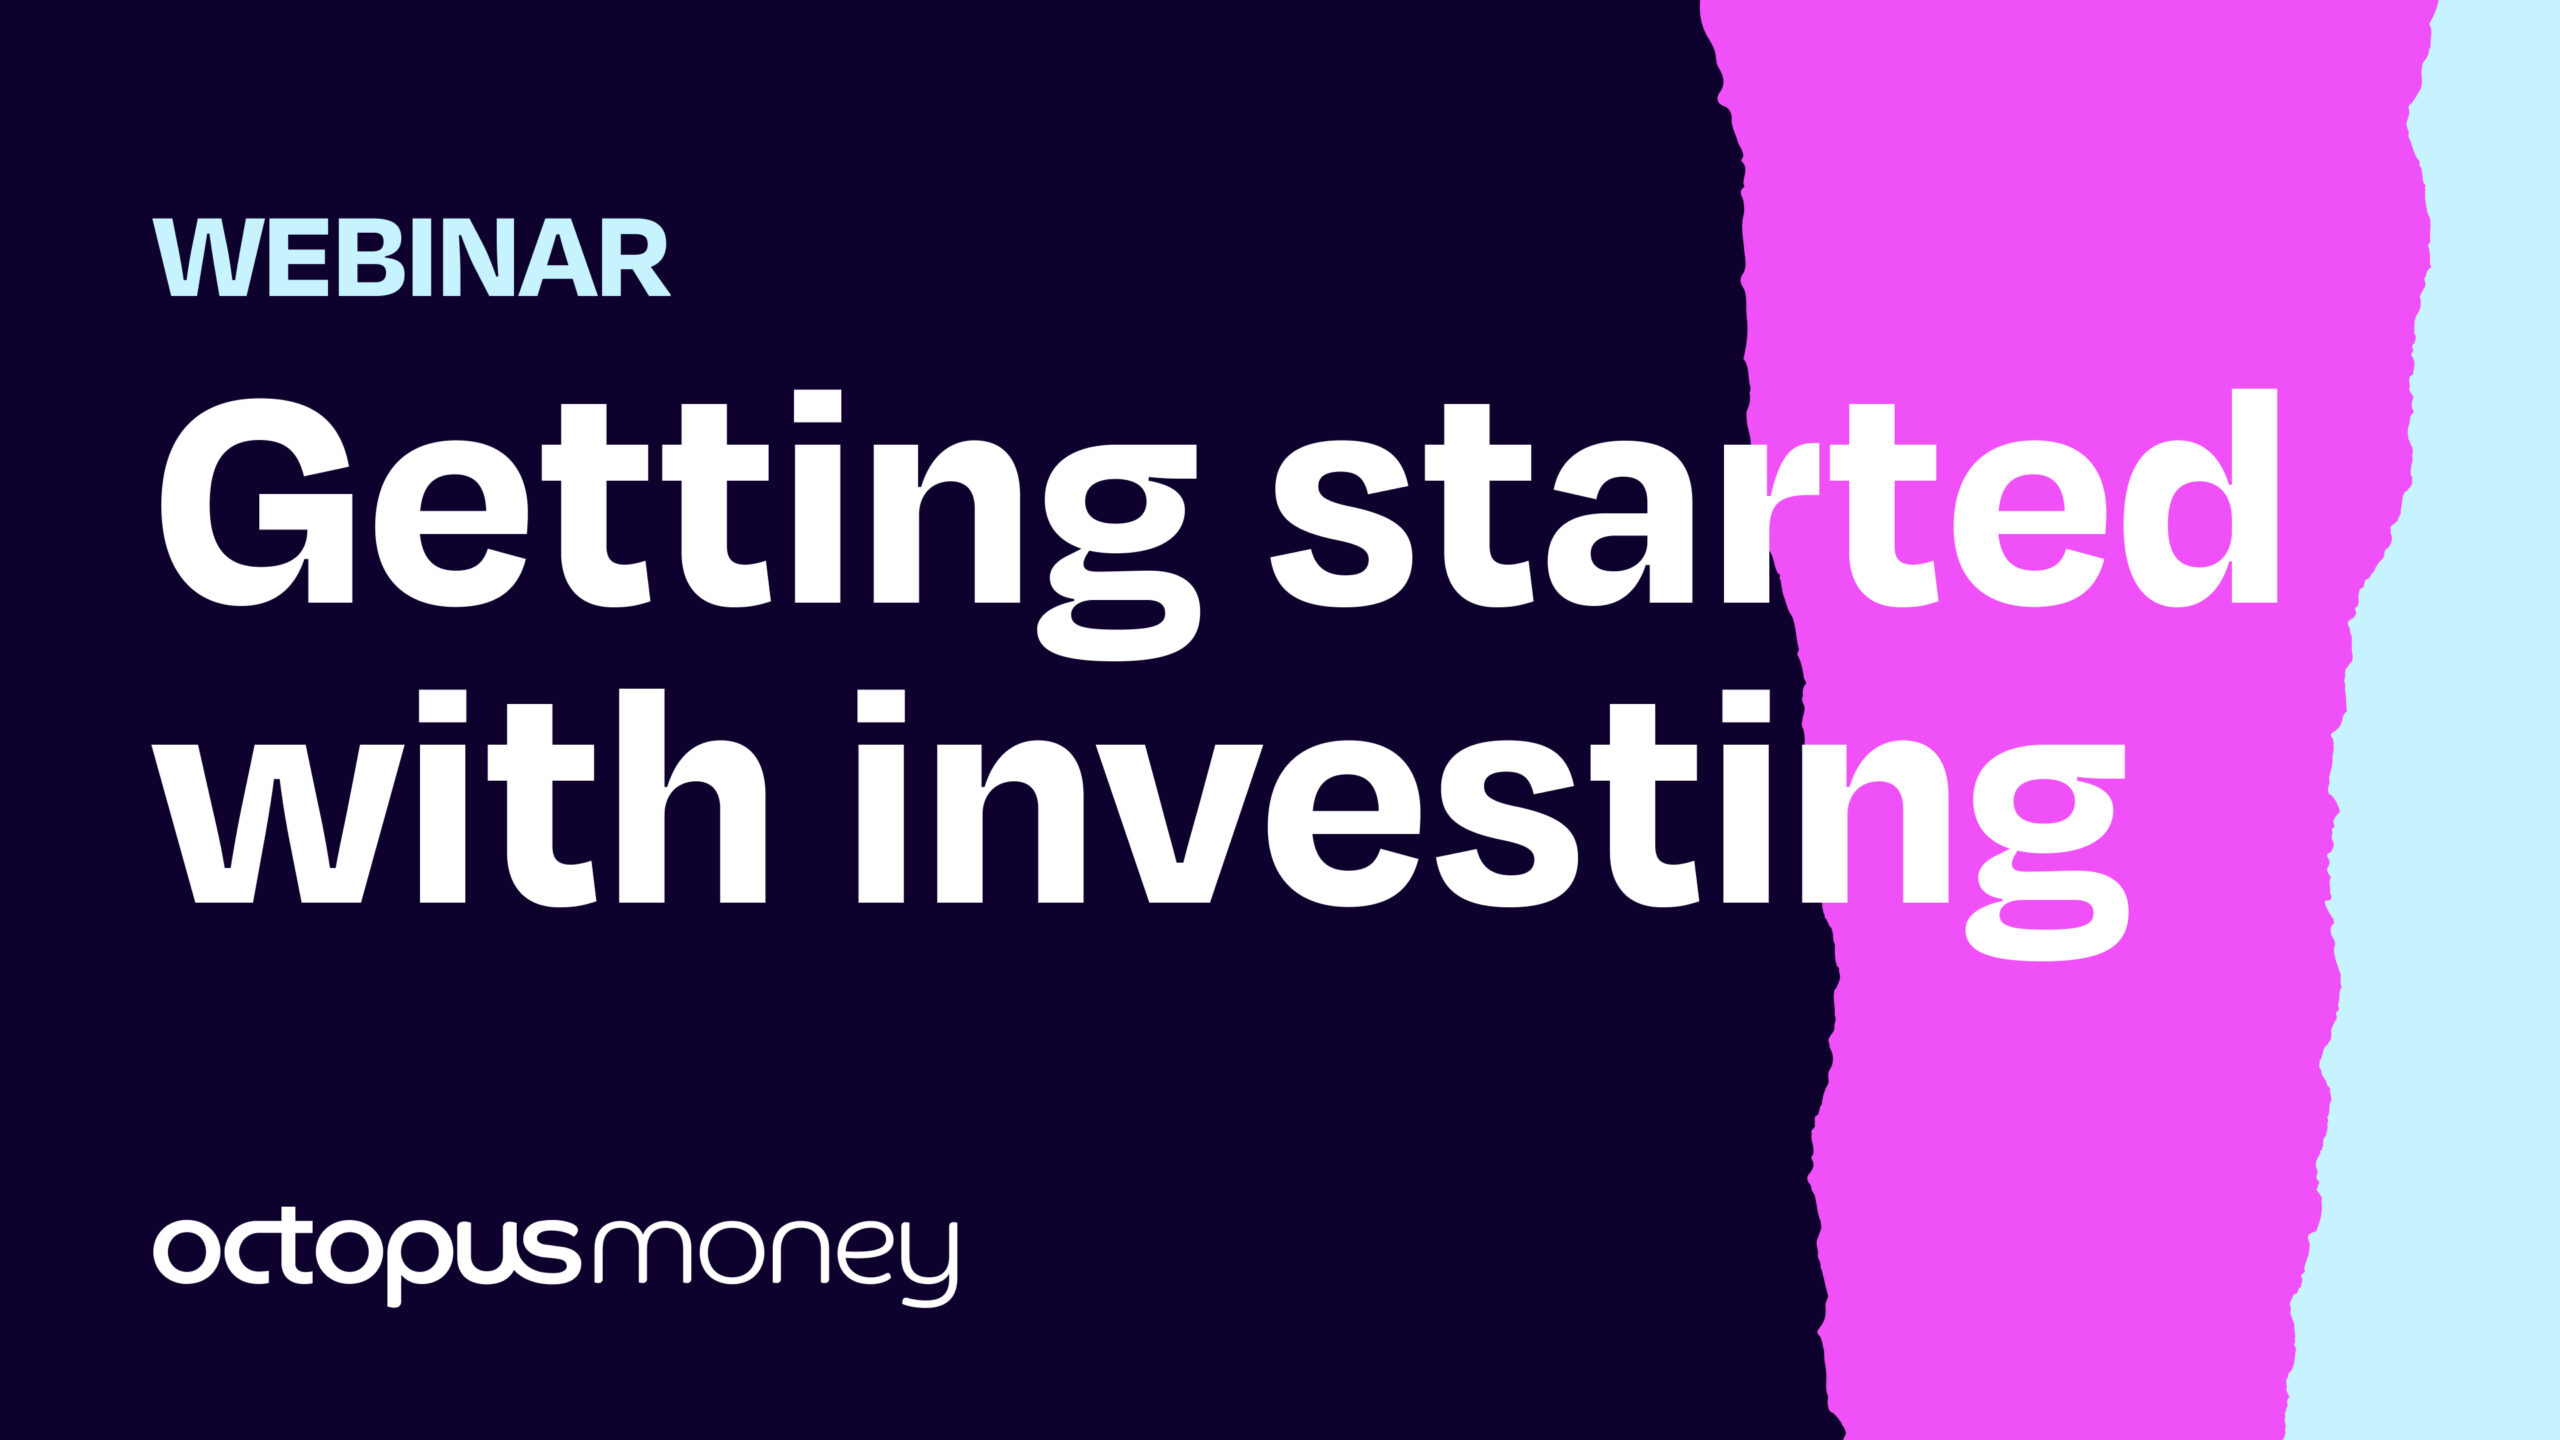 Getting started with investing